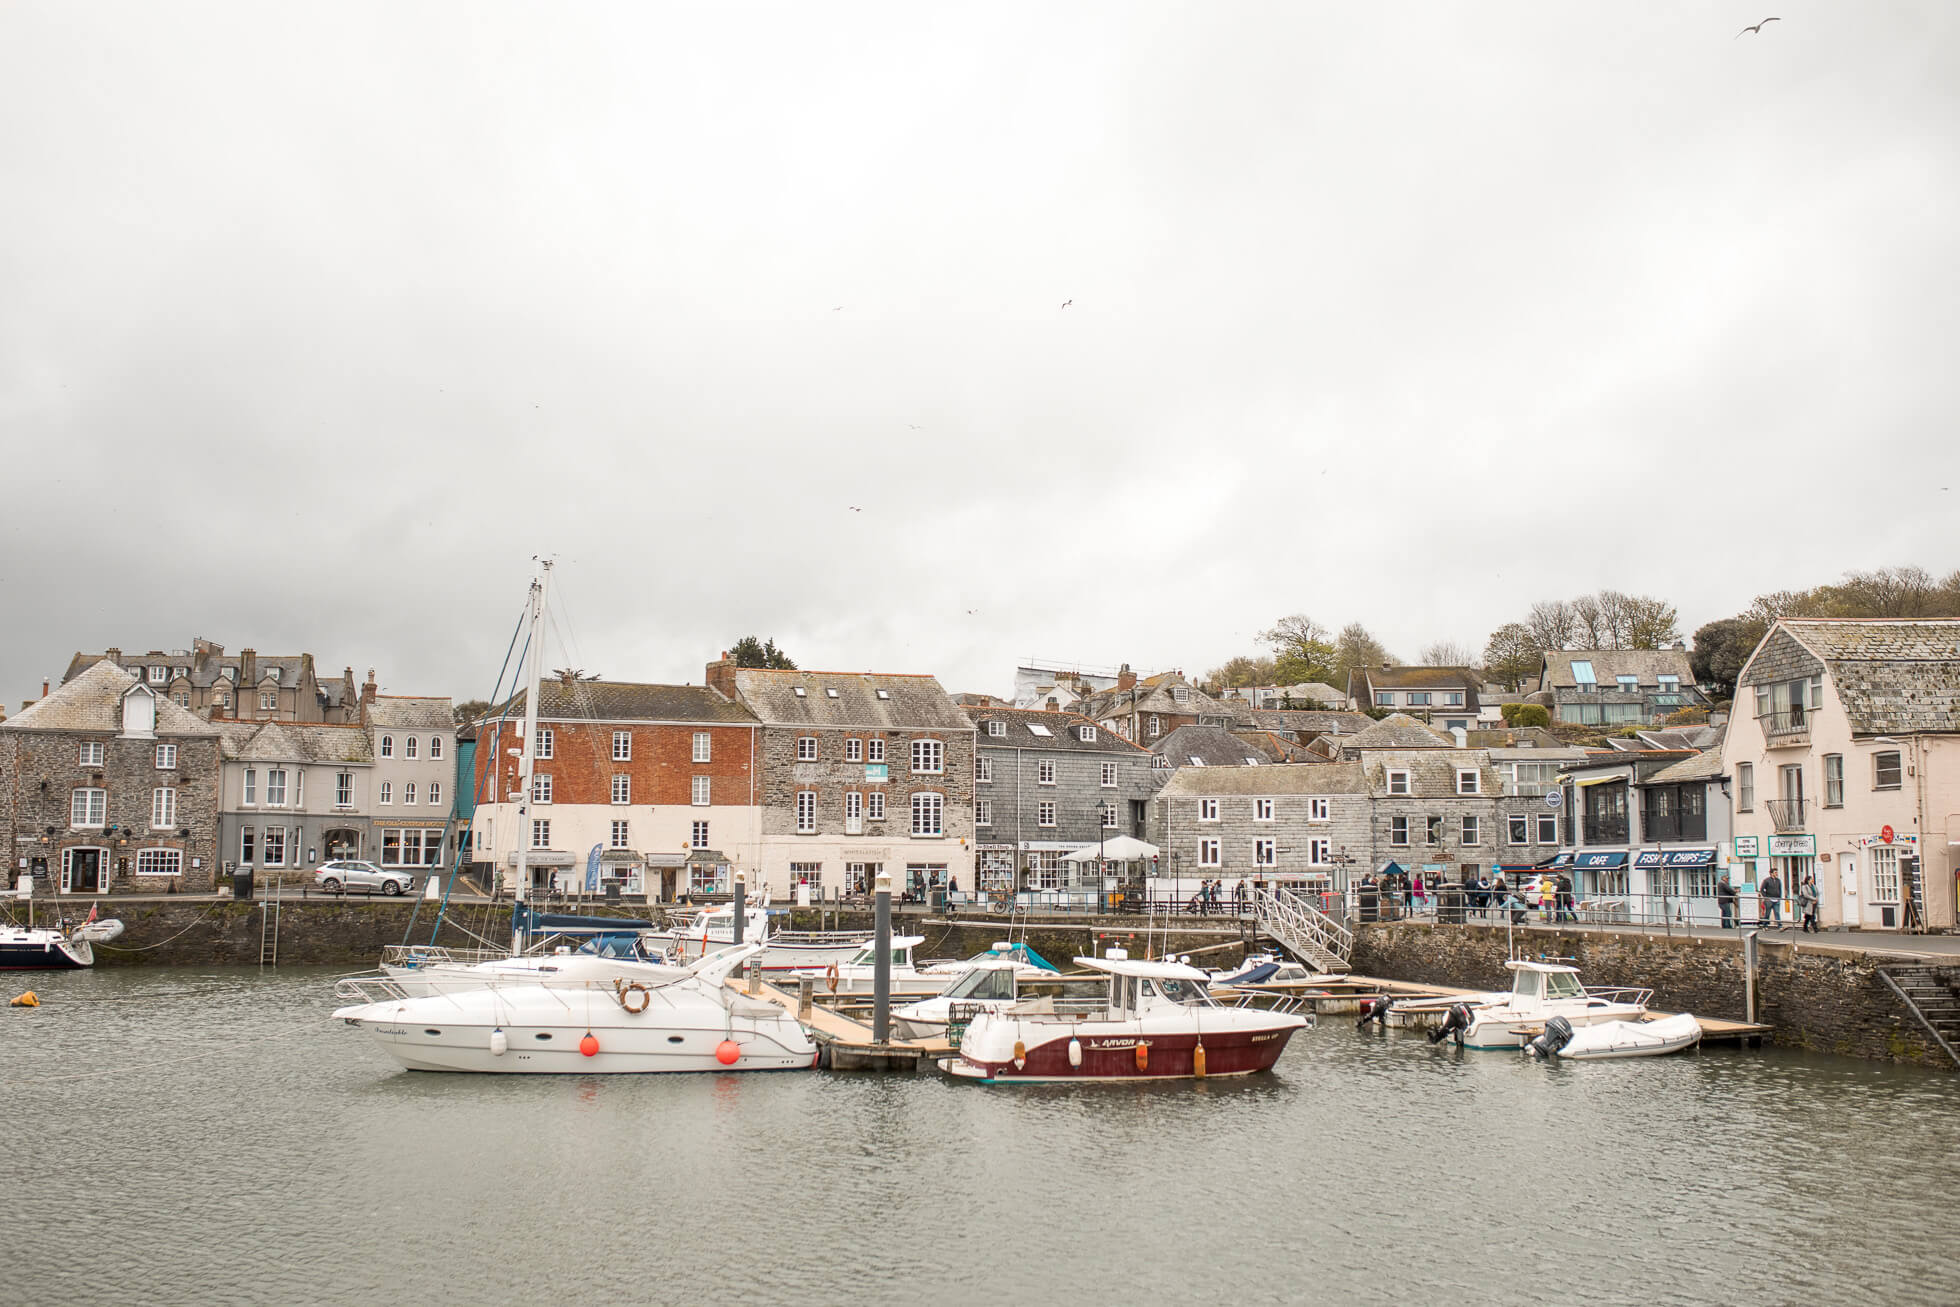 Padstow: A guide to the most beautiful little towns in Cornwall, England